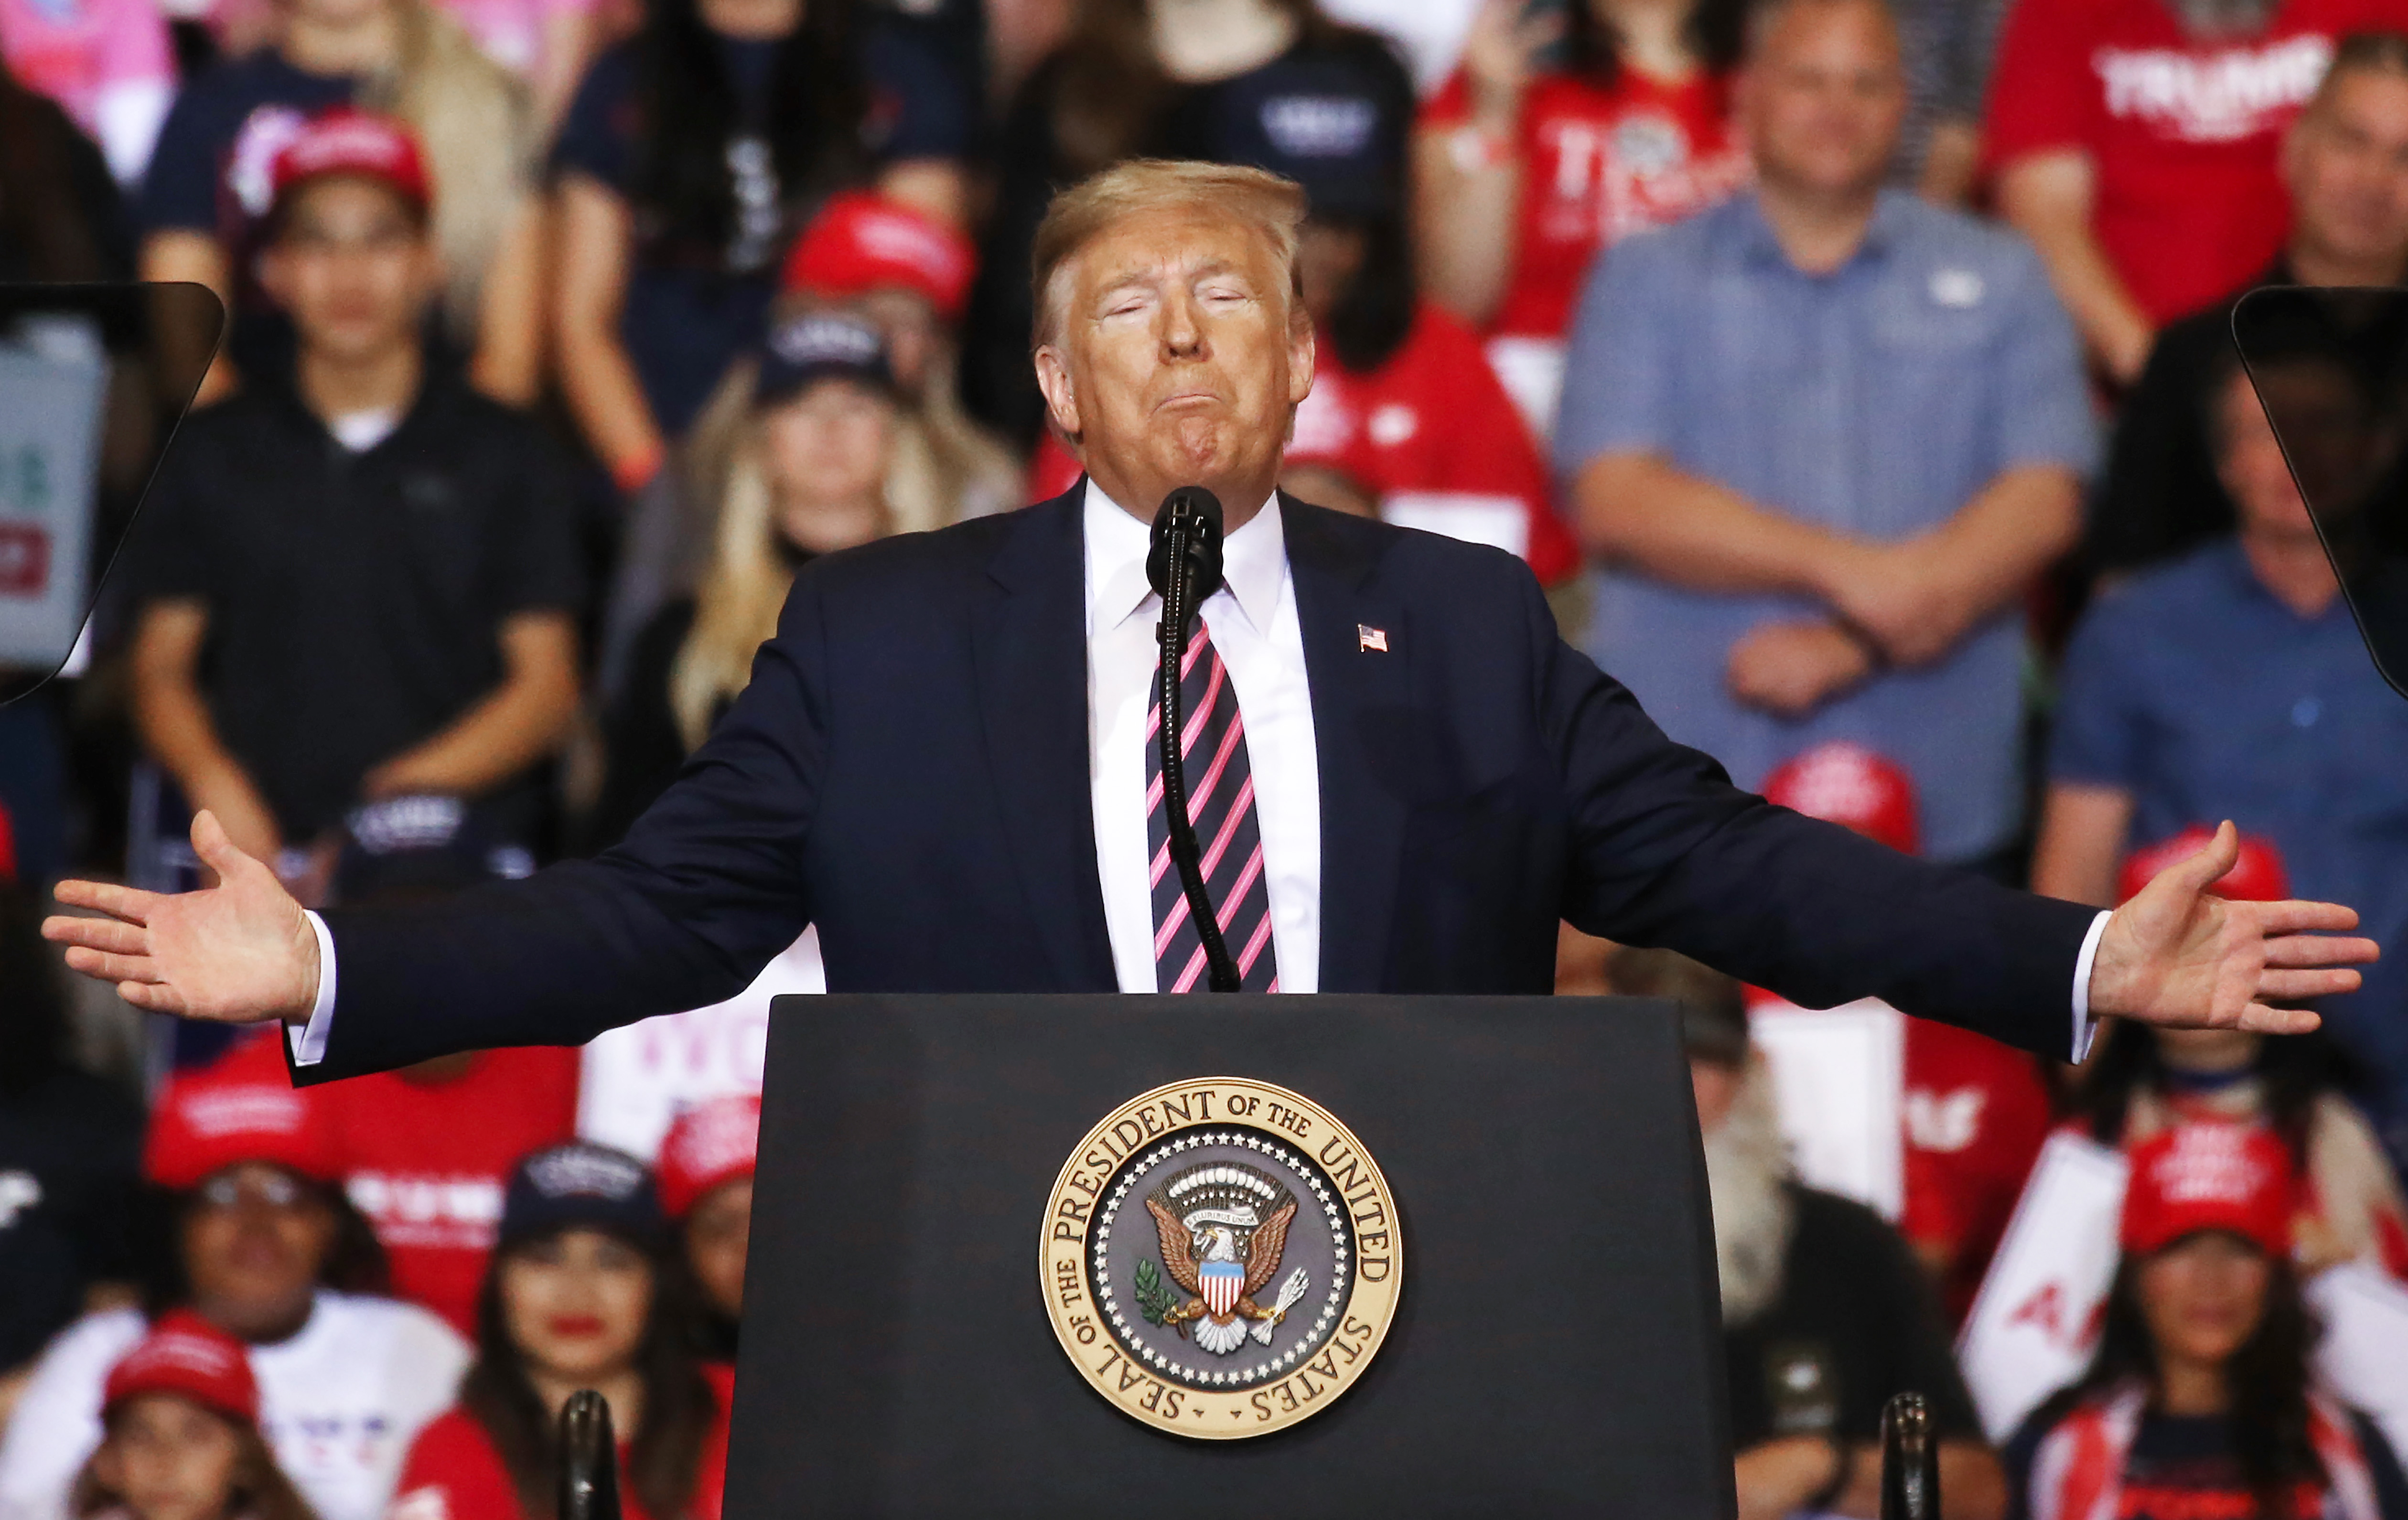 LAS VEGAS, NEVADA - FEBRUARY 21: US President Donald Trump speaks at a campaign rally at Las Vegas Convention Center on Feb. 21, 2020 in Las Vegas, Nevada. The upcoming Nevada Democratic presidential caucus will be held February 22. (Photo by Mario Tama/Getty Images)